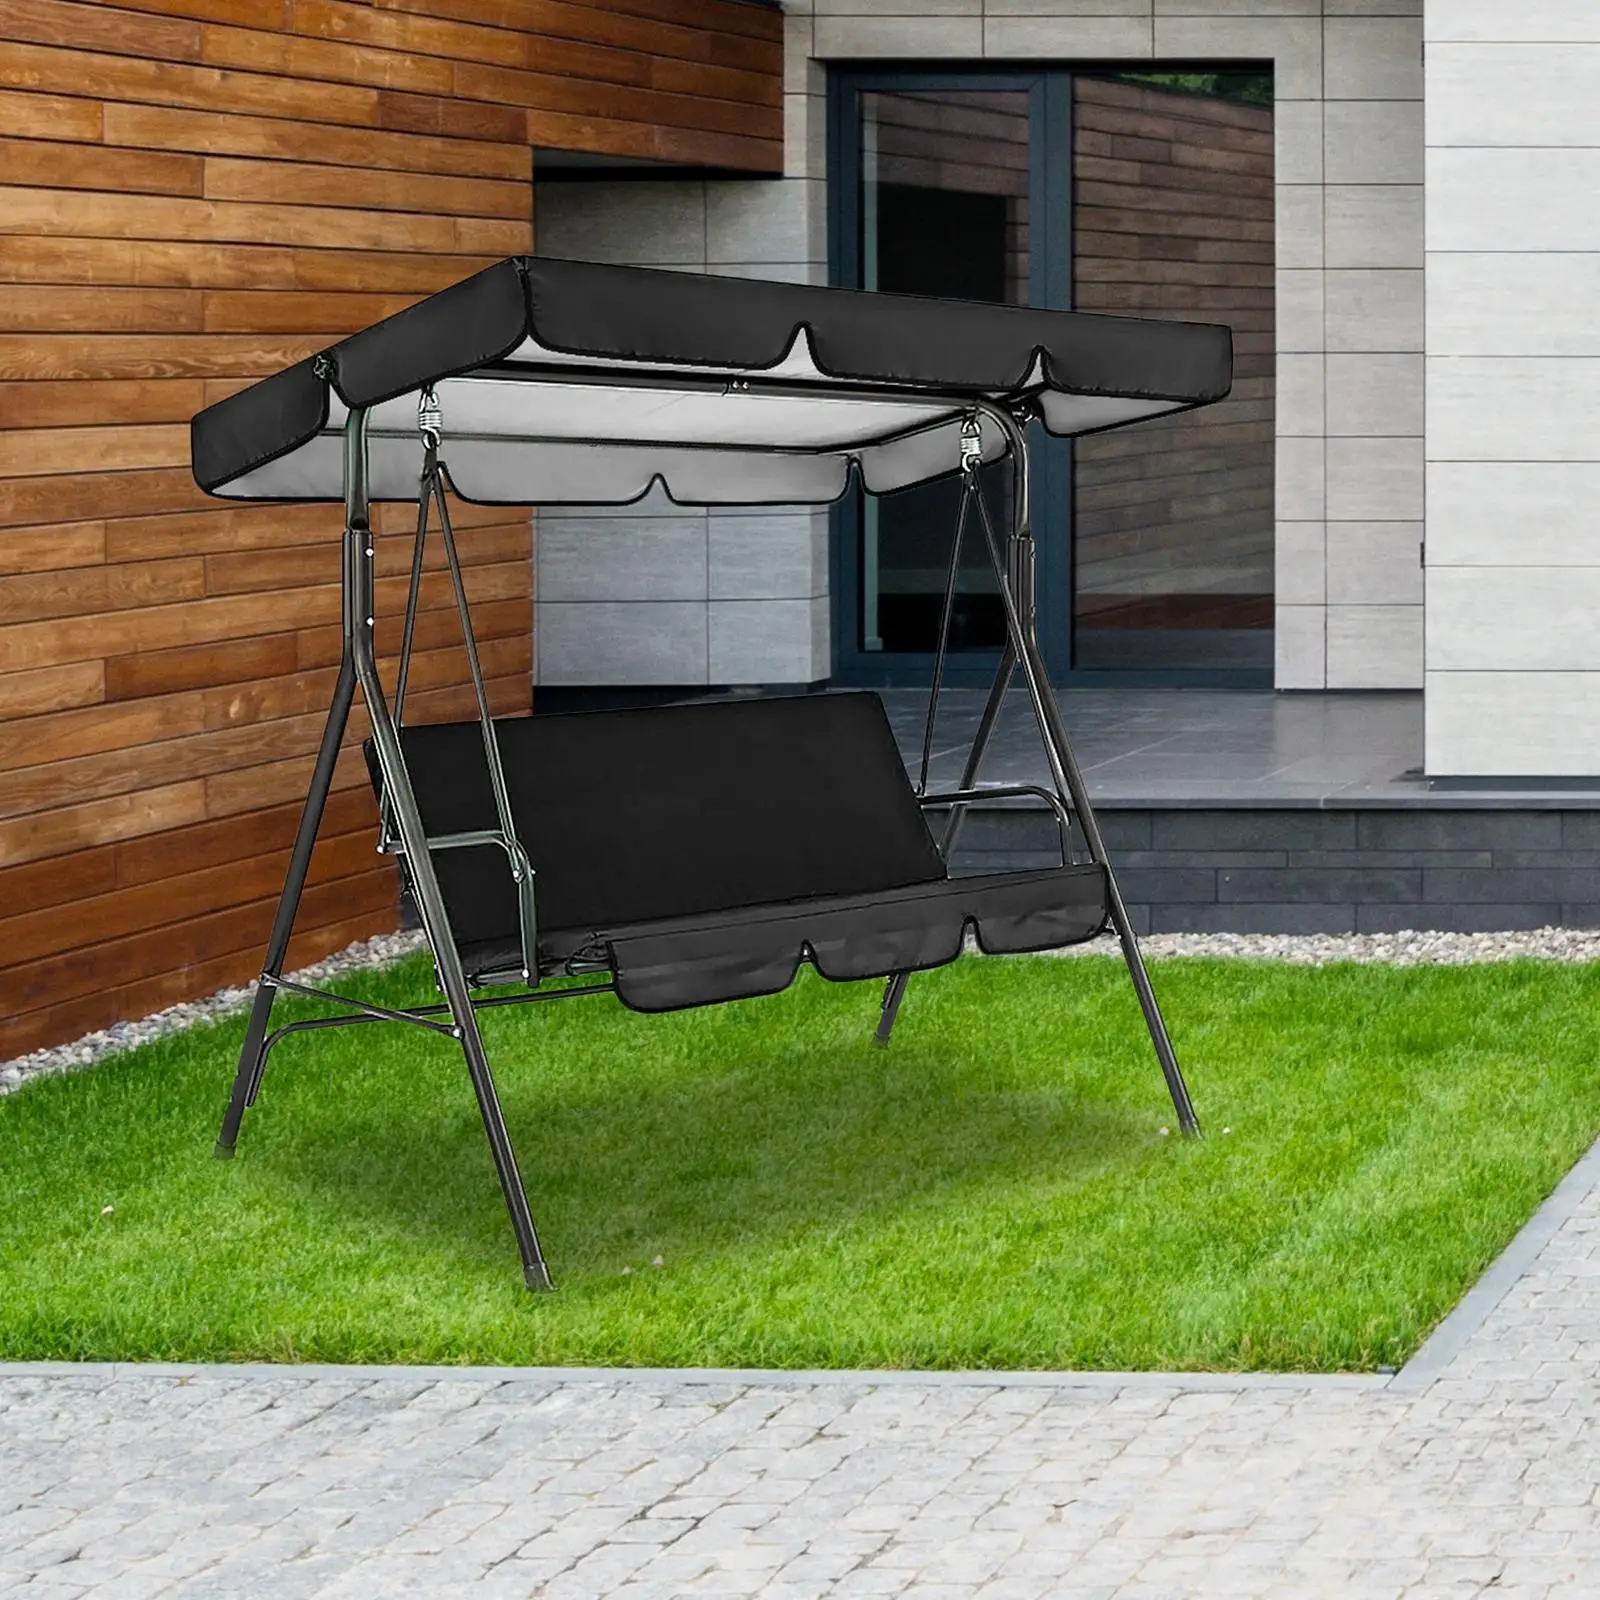 Patio Swing Canopy Durable Swing Chair Dust Covers Rain Cover Swing Seat Top Cover for Garden Canopy Yard Outdoor Furniture